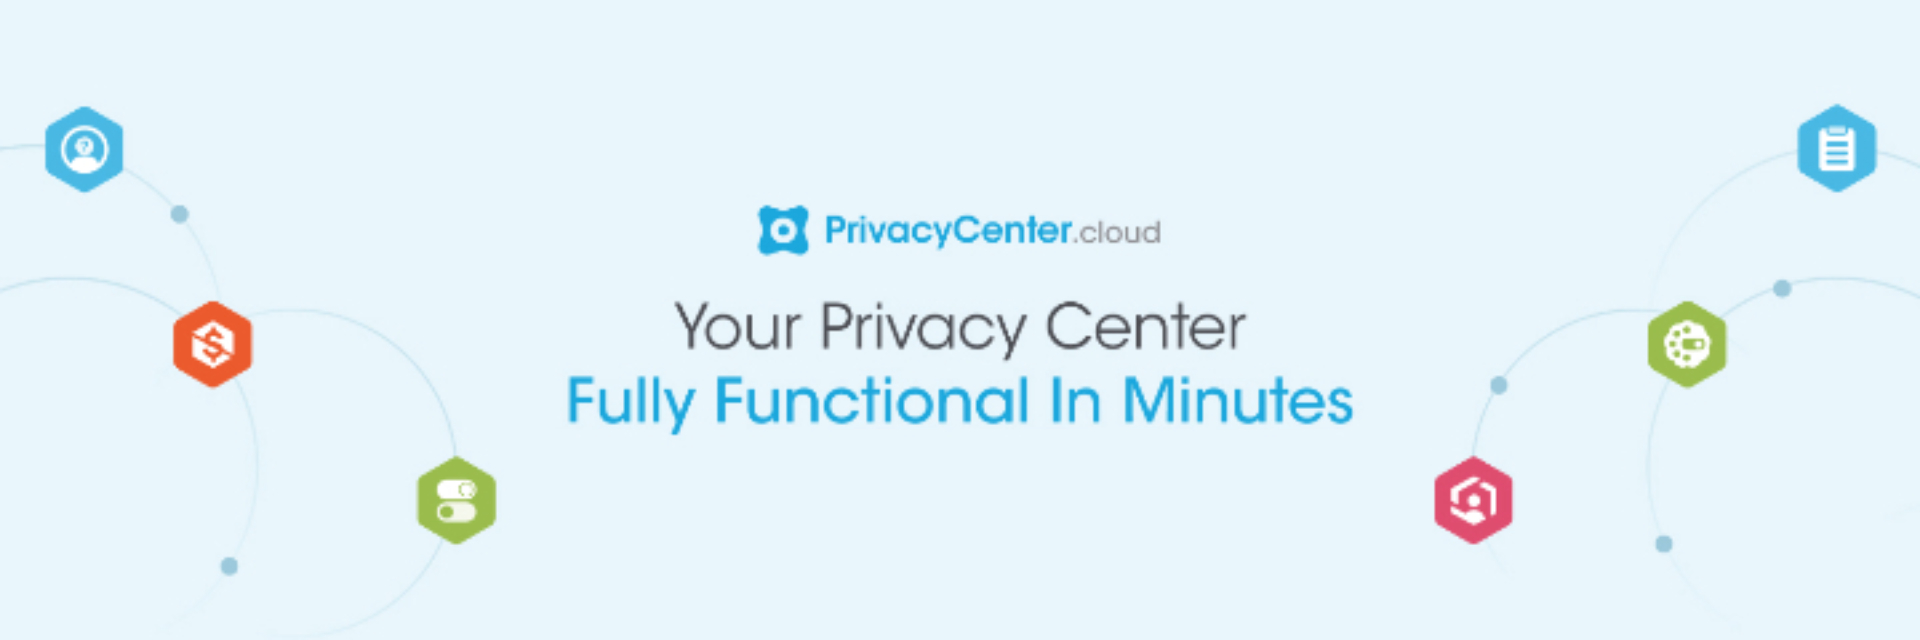 Lifetime Deal to Securiti Privacy Center: Pro for $254